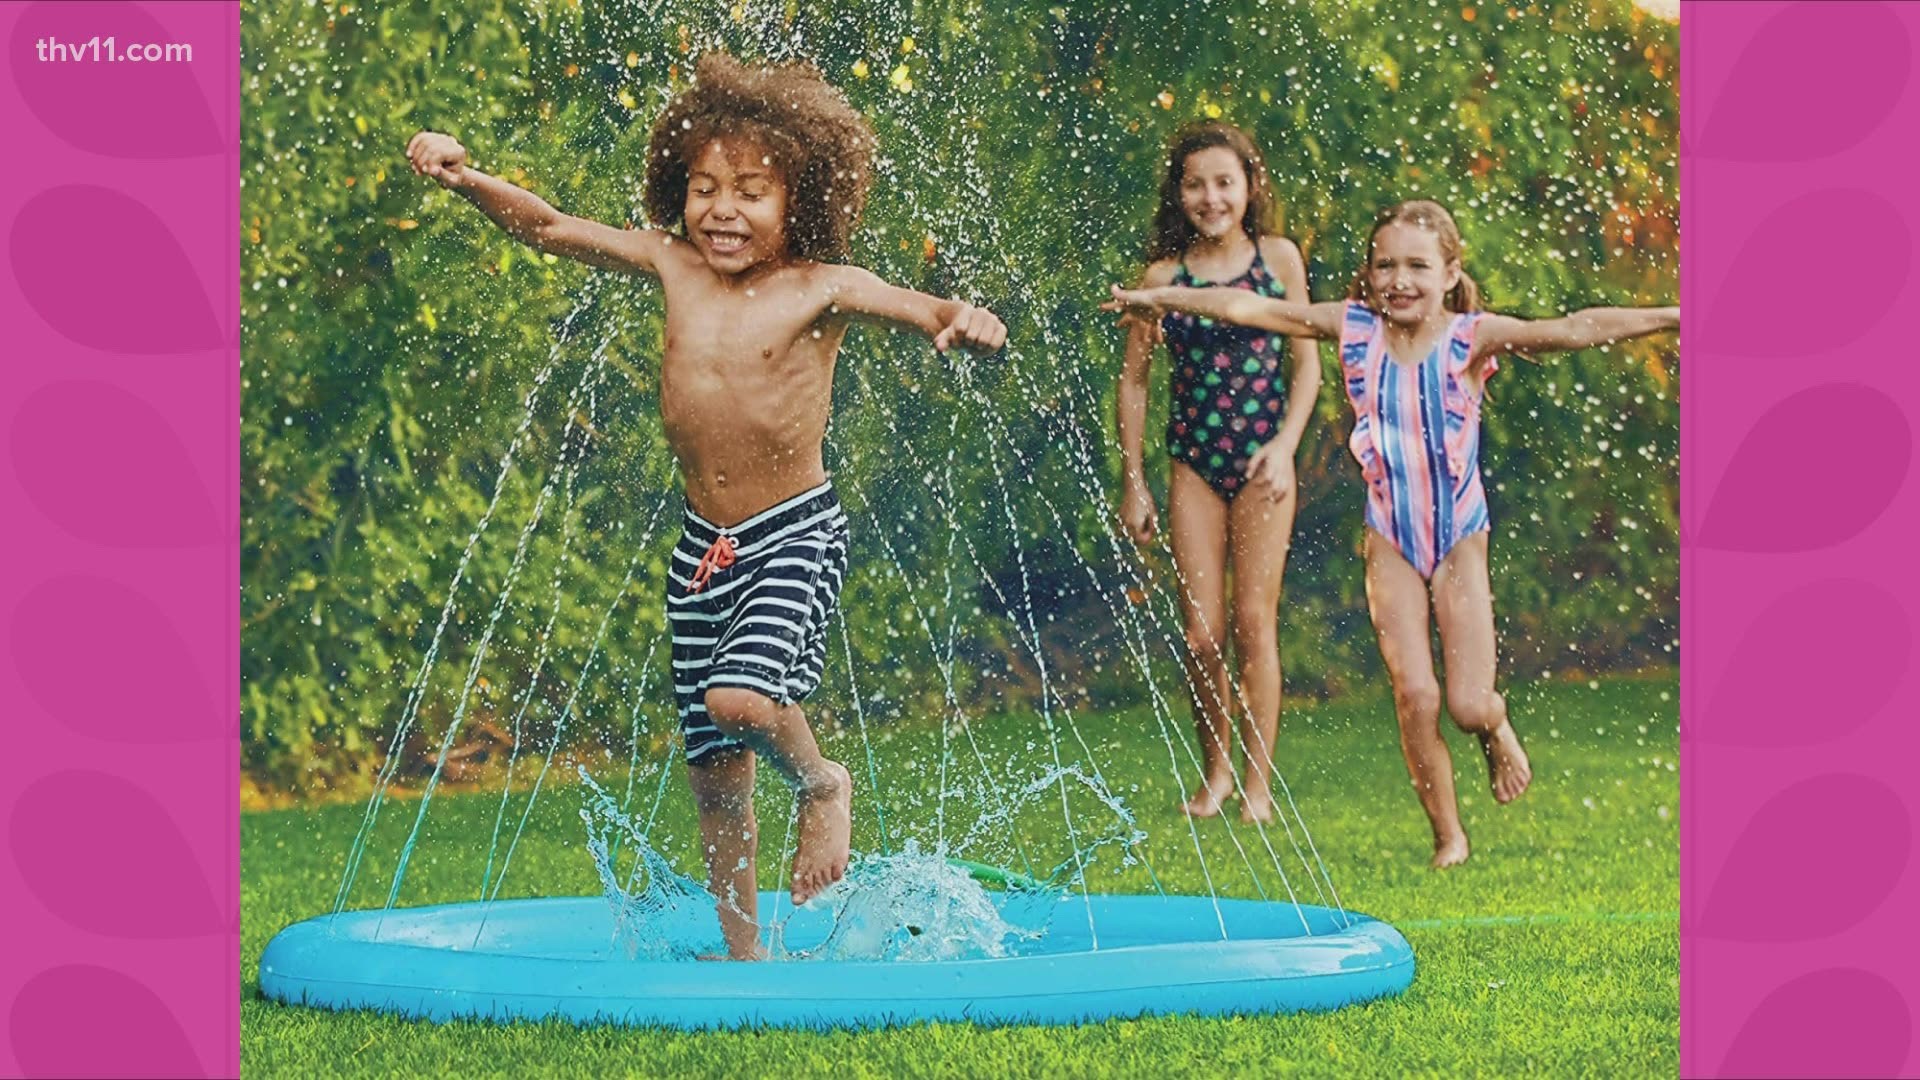 Julia Wohlers with Zulily shares ideas for unstructured activities to keep your kids entertained and safe this summer.